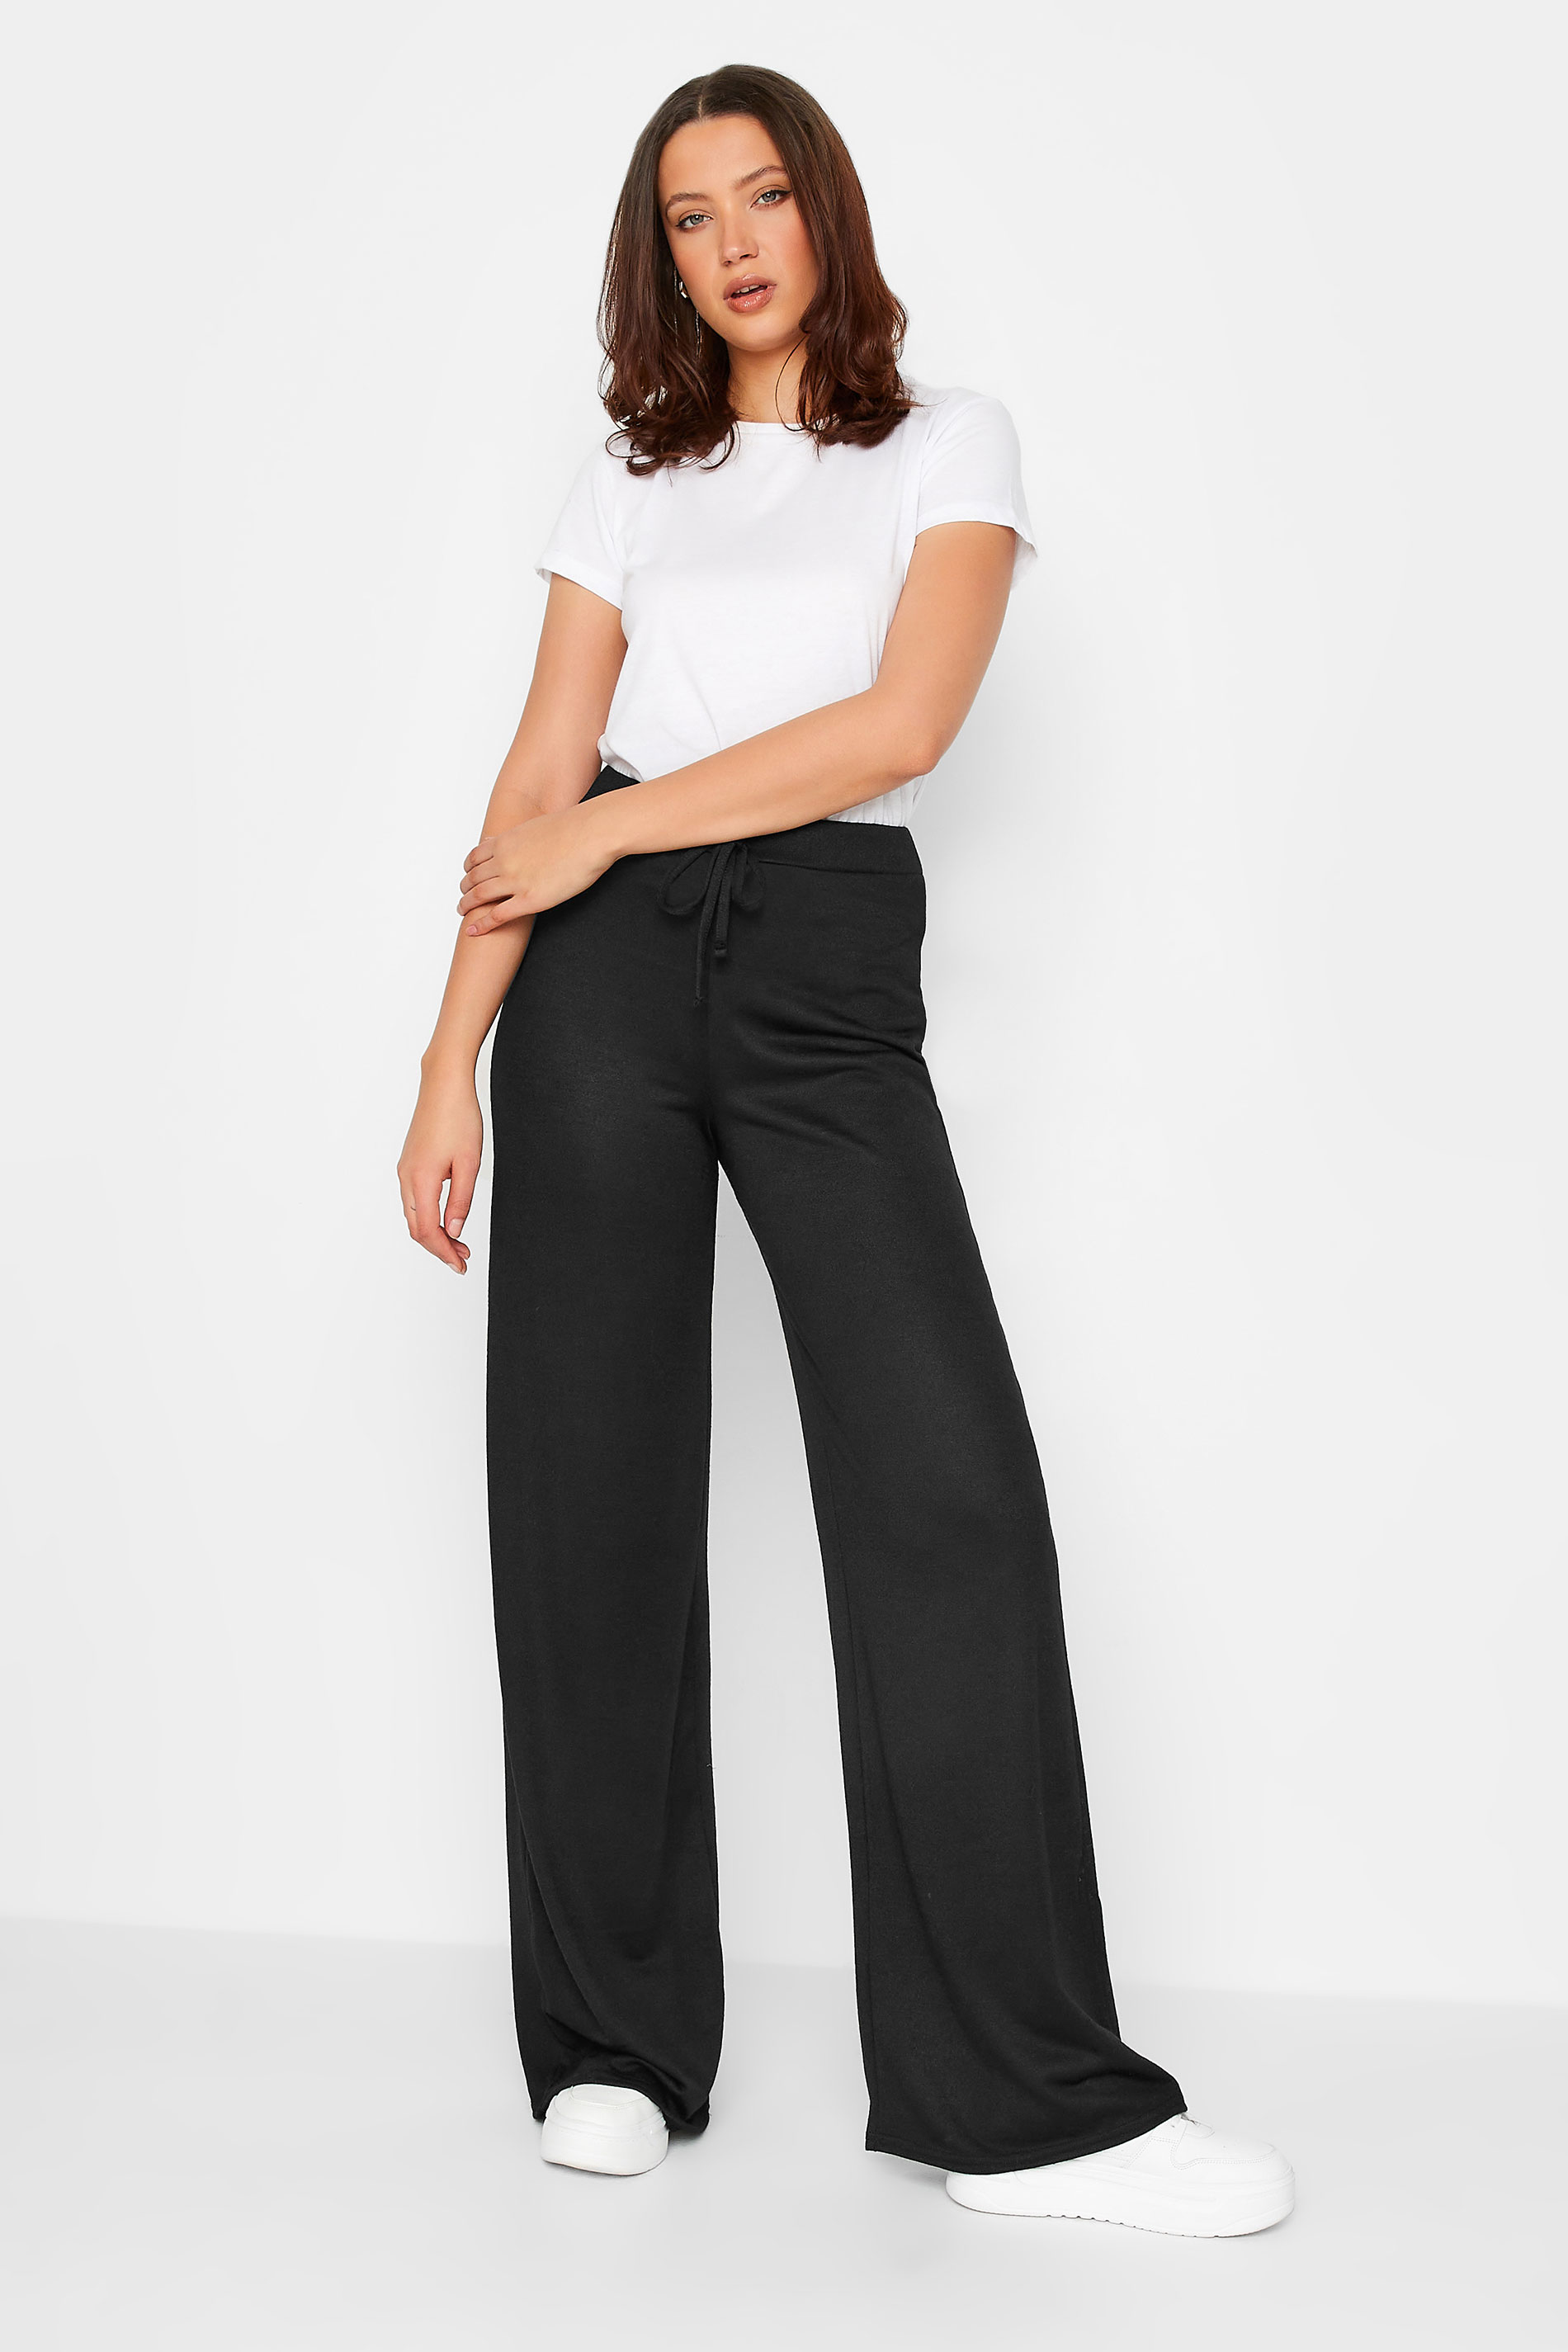 LTS Tall Black Knitted Trousers | Long Tall Sally 2